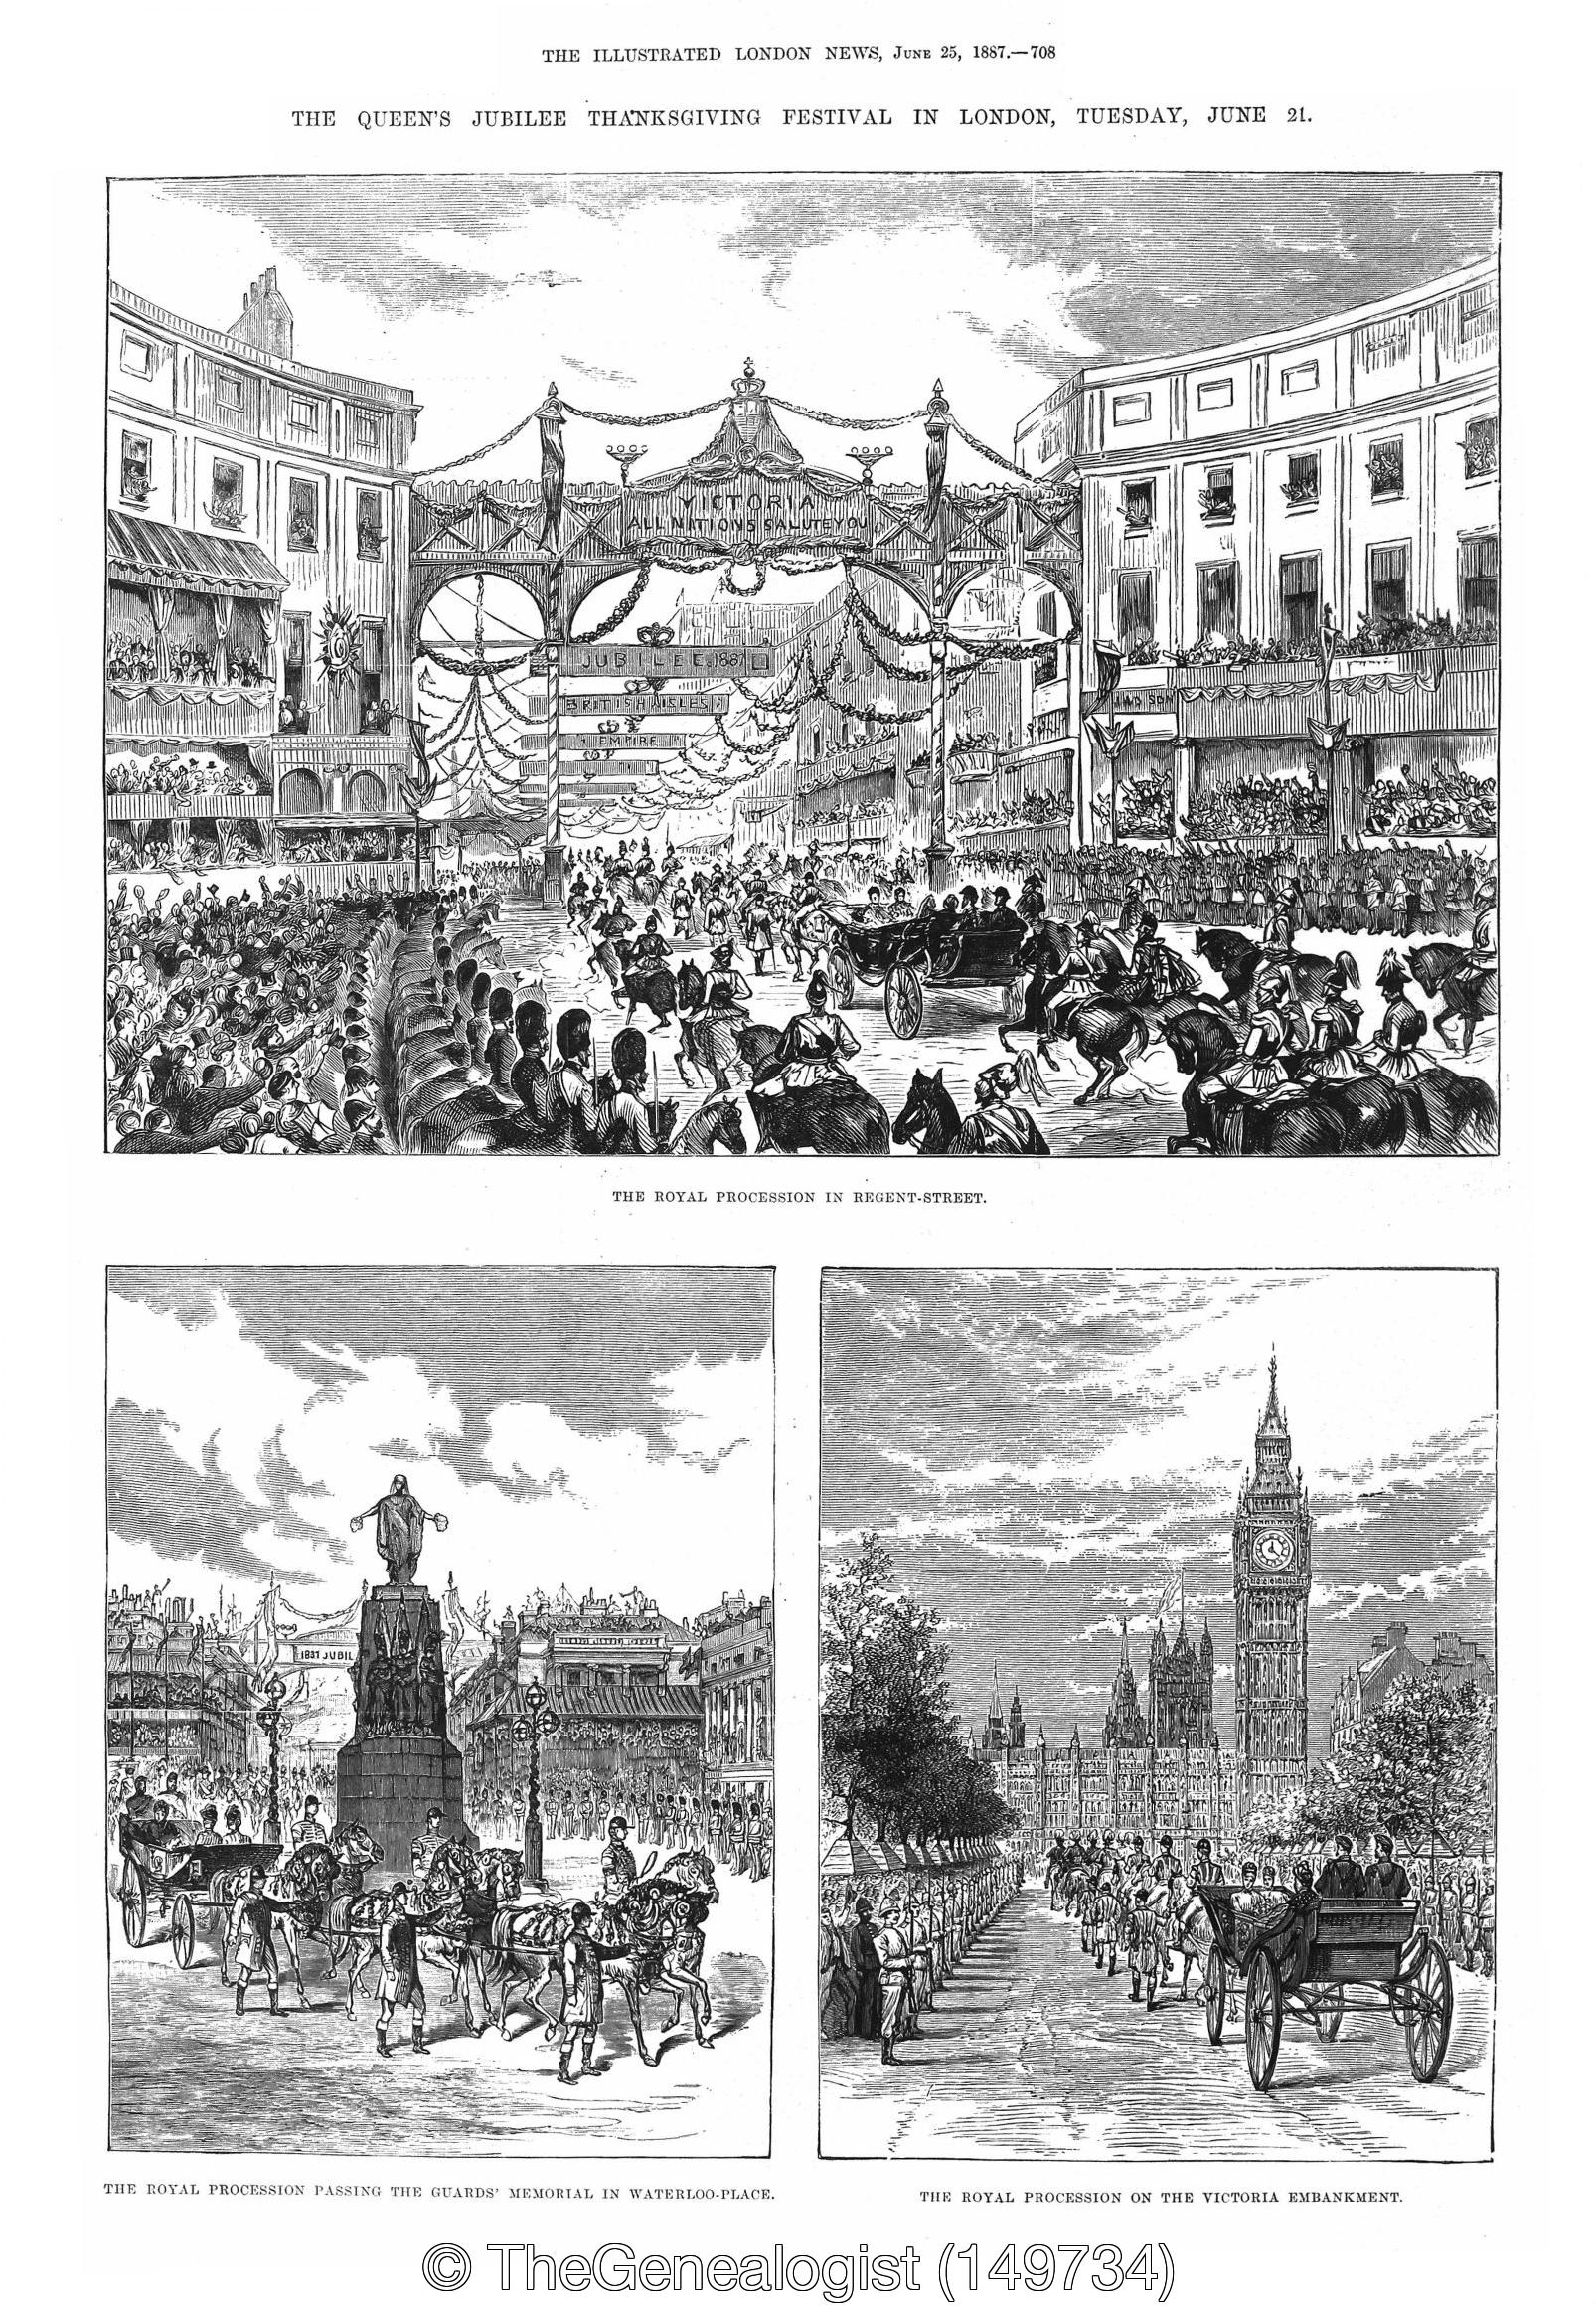 The Jubilee of 1887 as featured in the Illustrated London News – TheGenealogist Newspapers and Magazine
		Collection